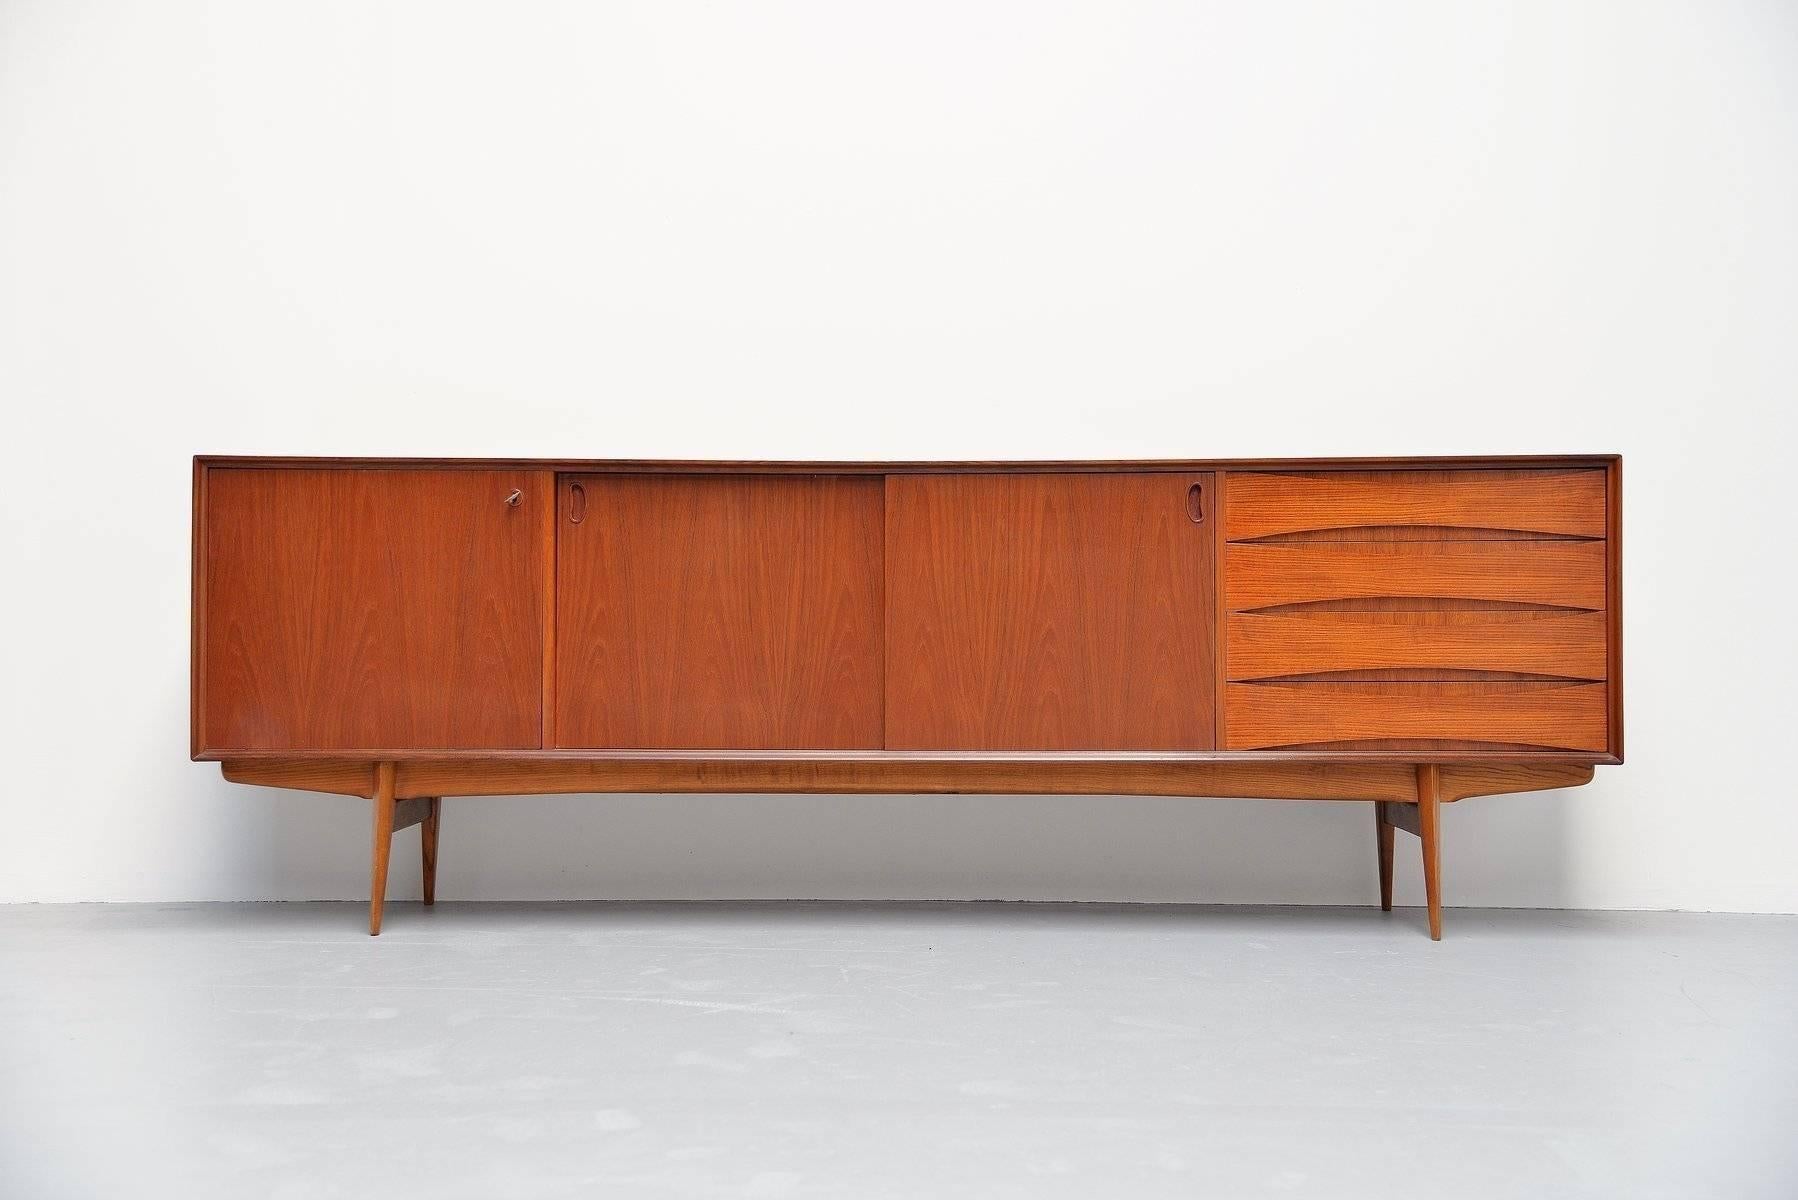 Very nice and quality sideboard designed by Oswald Vermaercke for V-Form, Belgium, 1959. This amazing credenza has a very nice and warm teak color and is in fully original condition. The designs by Oswald Vermaercke are visibly inspired by the